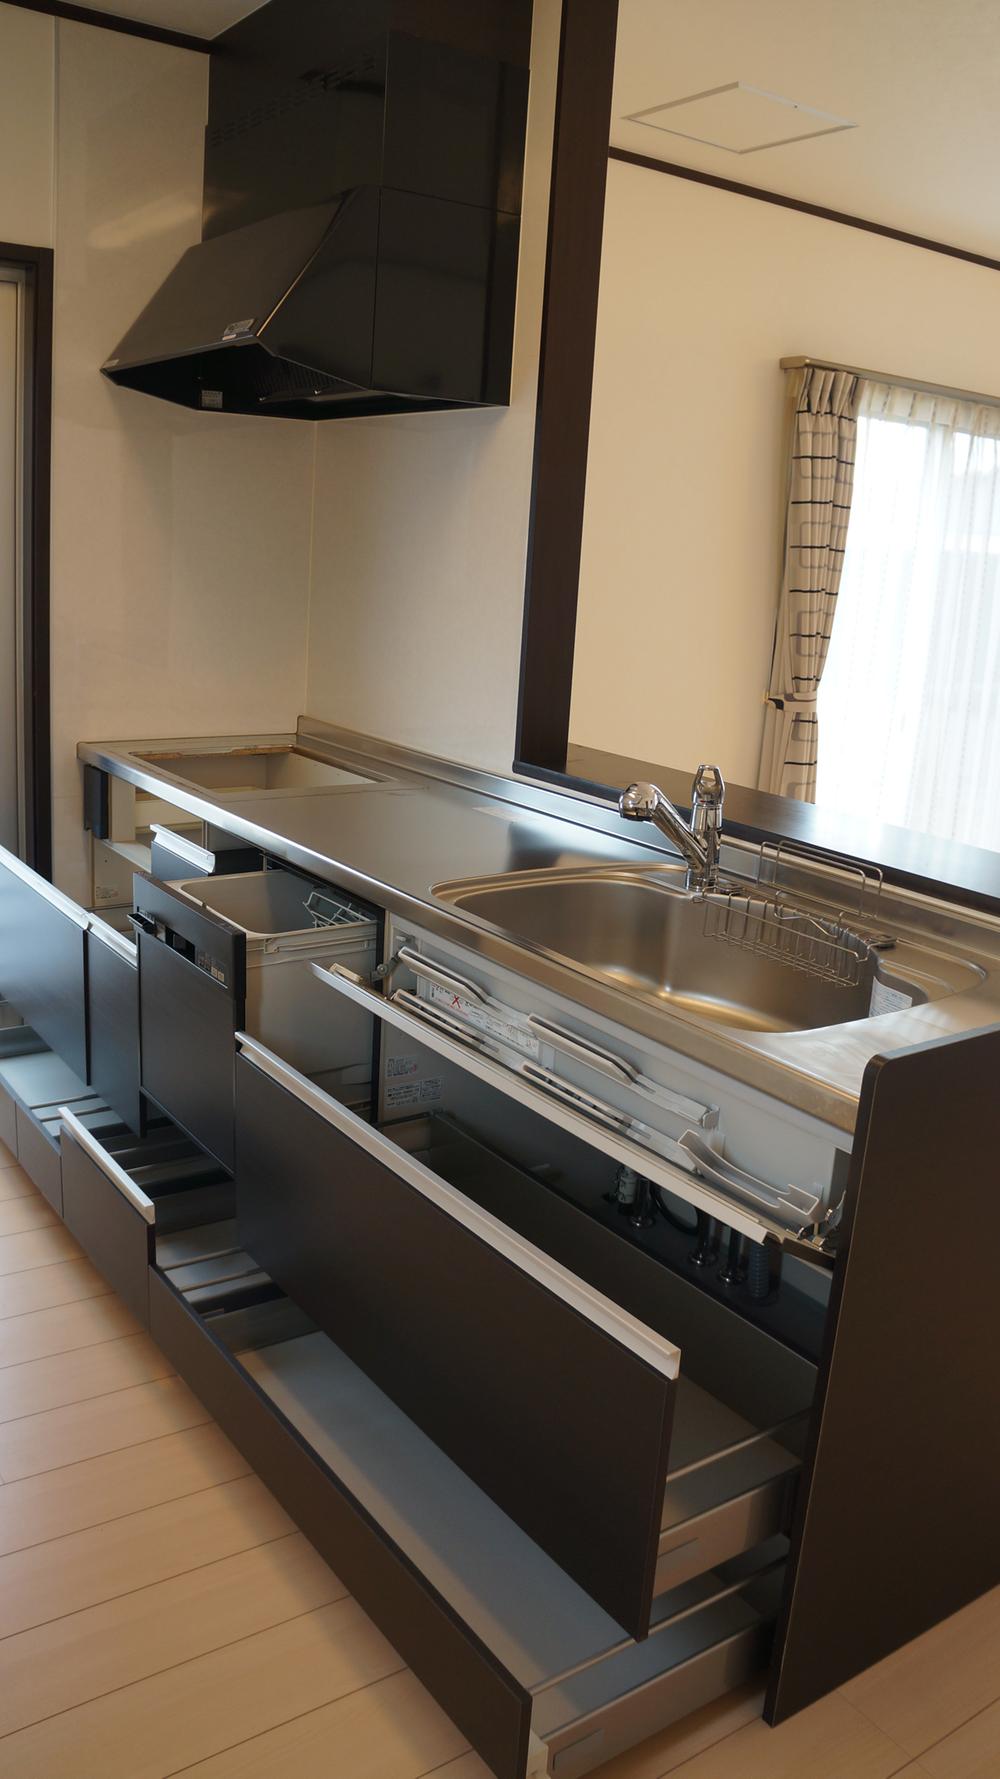 Kitchen. Dishwasher with the excellent storage capacity of face-to-face system Kitchen